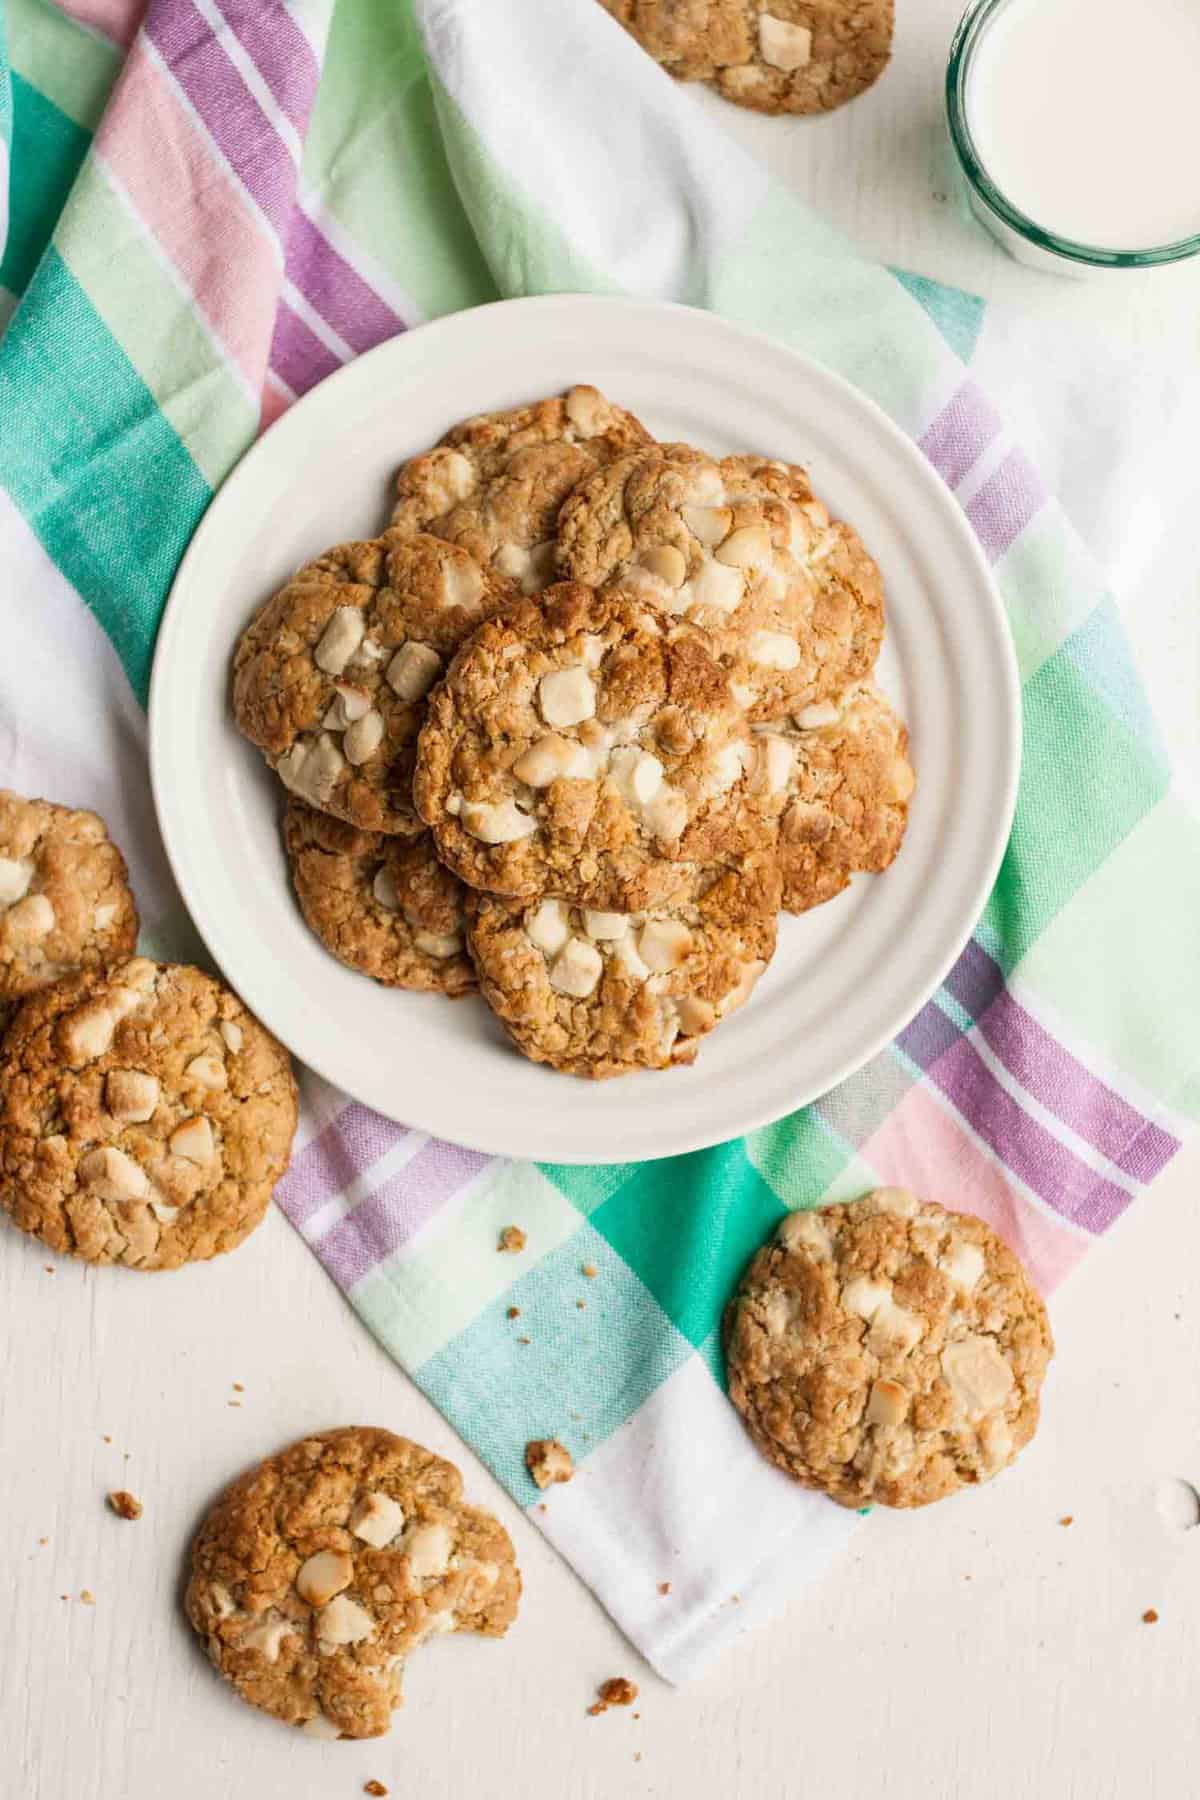 White Chocolate and Macadamia Oat Cookies - these chocolatey oatmeal cookies are both crunchy and chewy and are seriously easy to make! | eatloveeats.com